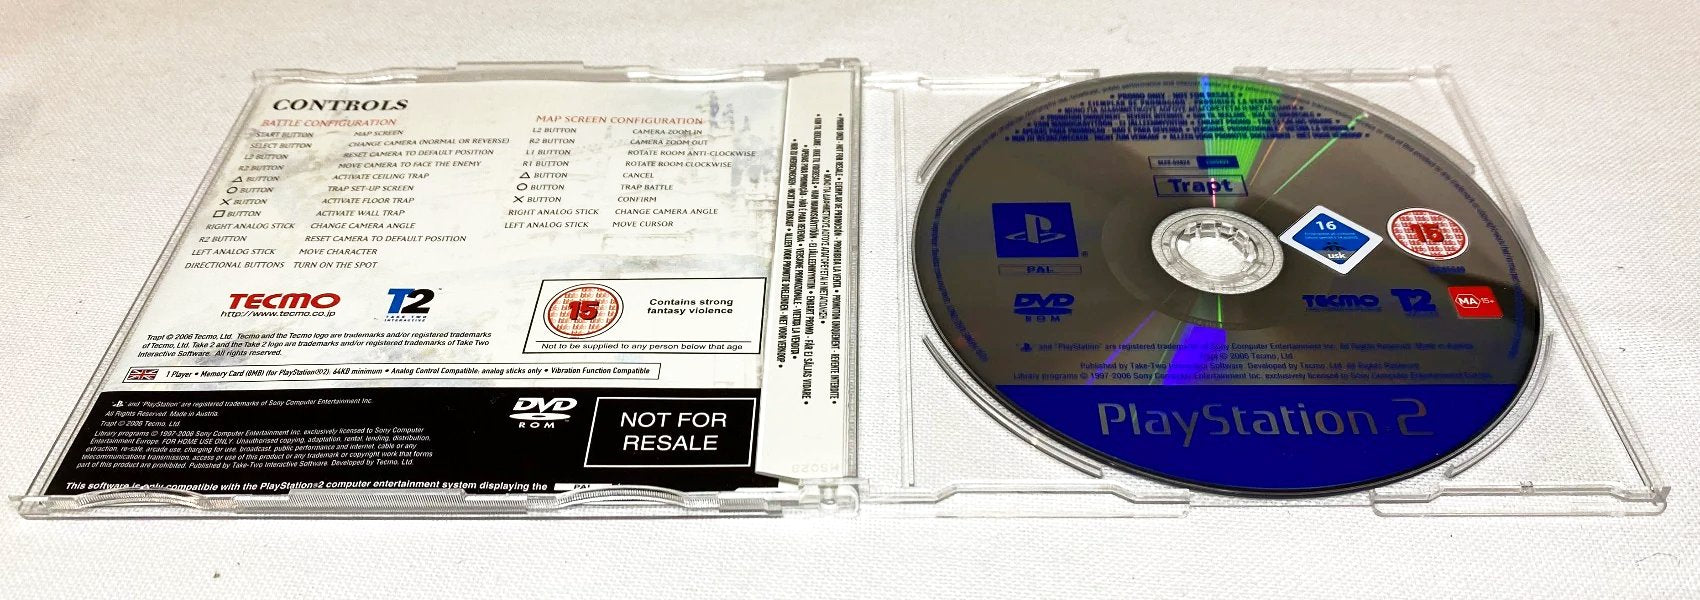 Game | Sony PlayStation PS2 | Trapt [Promo Not For Resale]